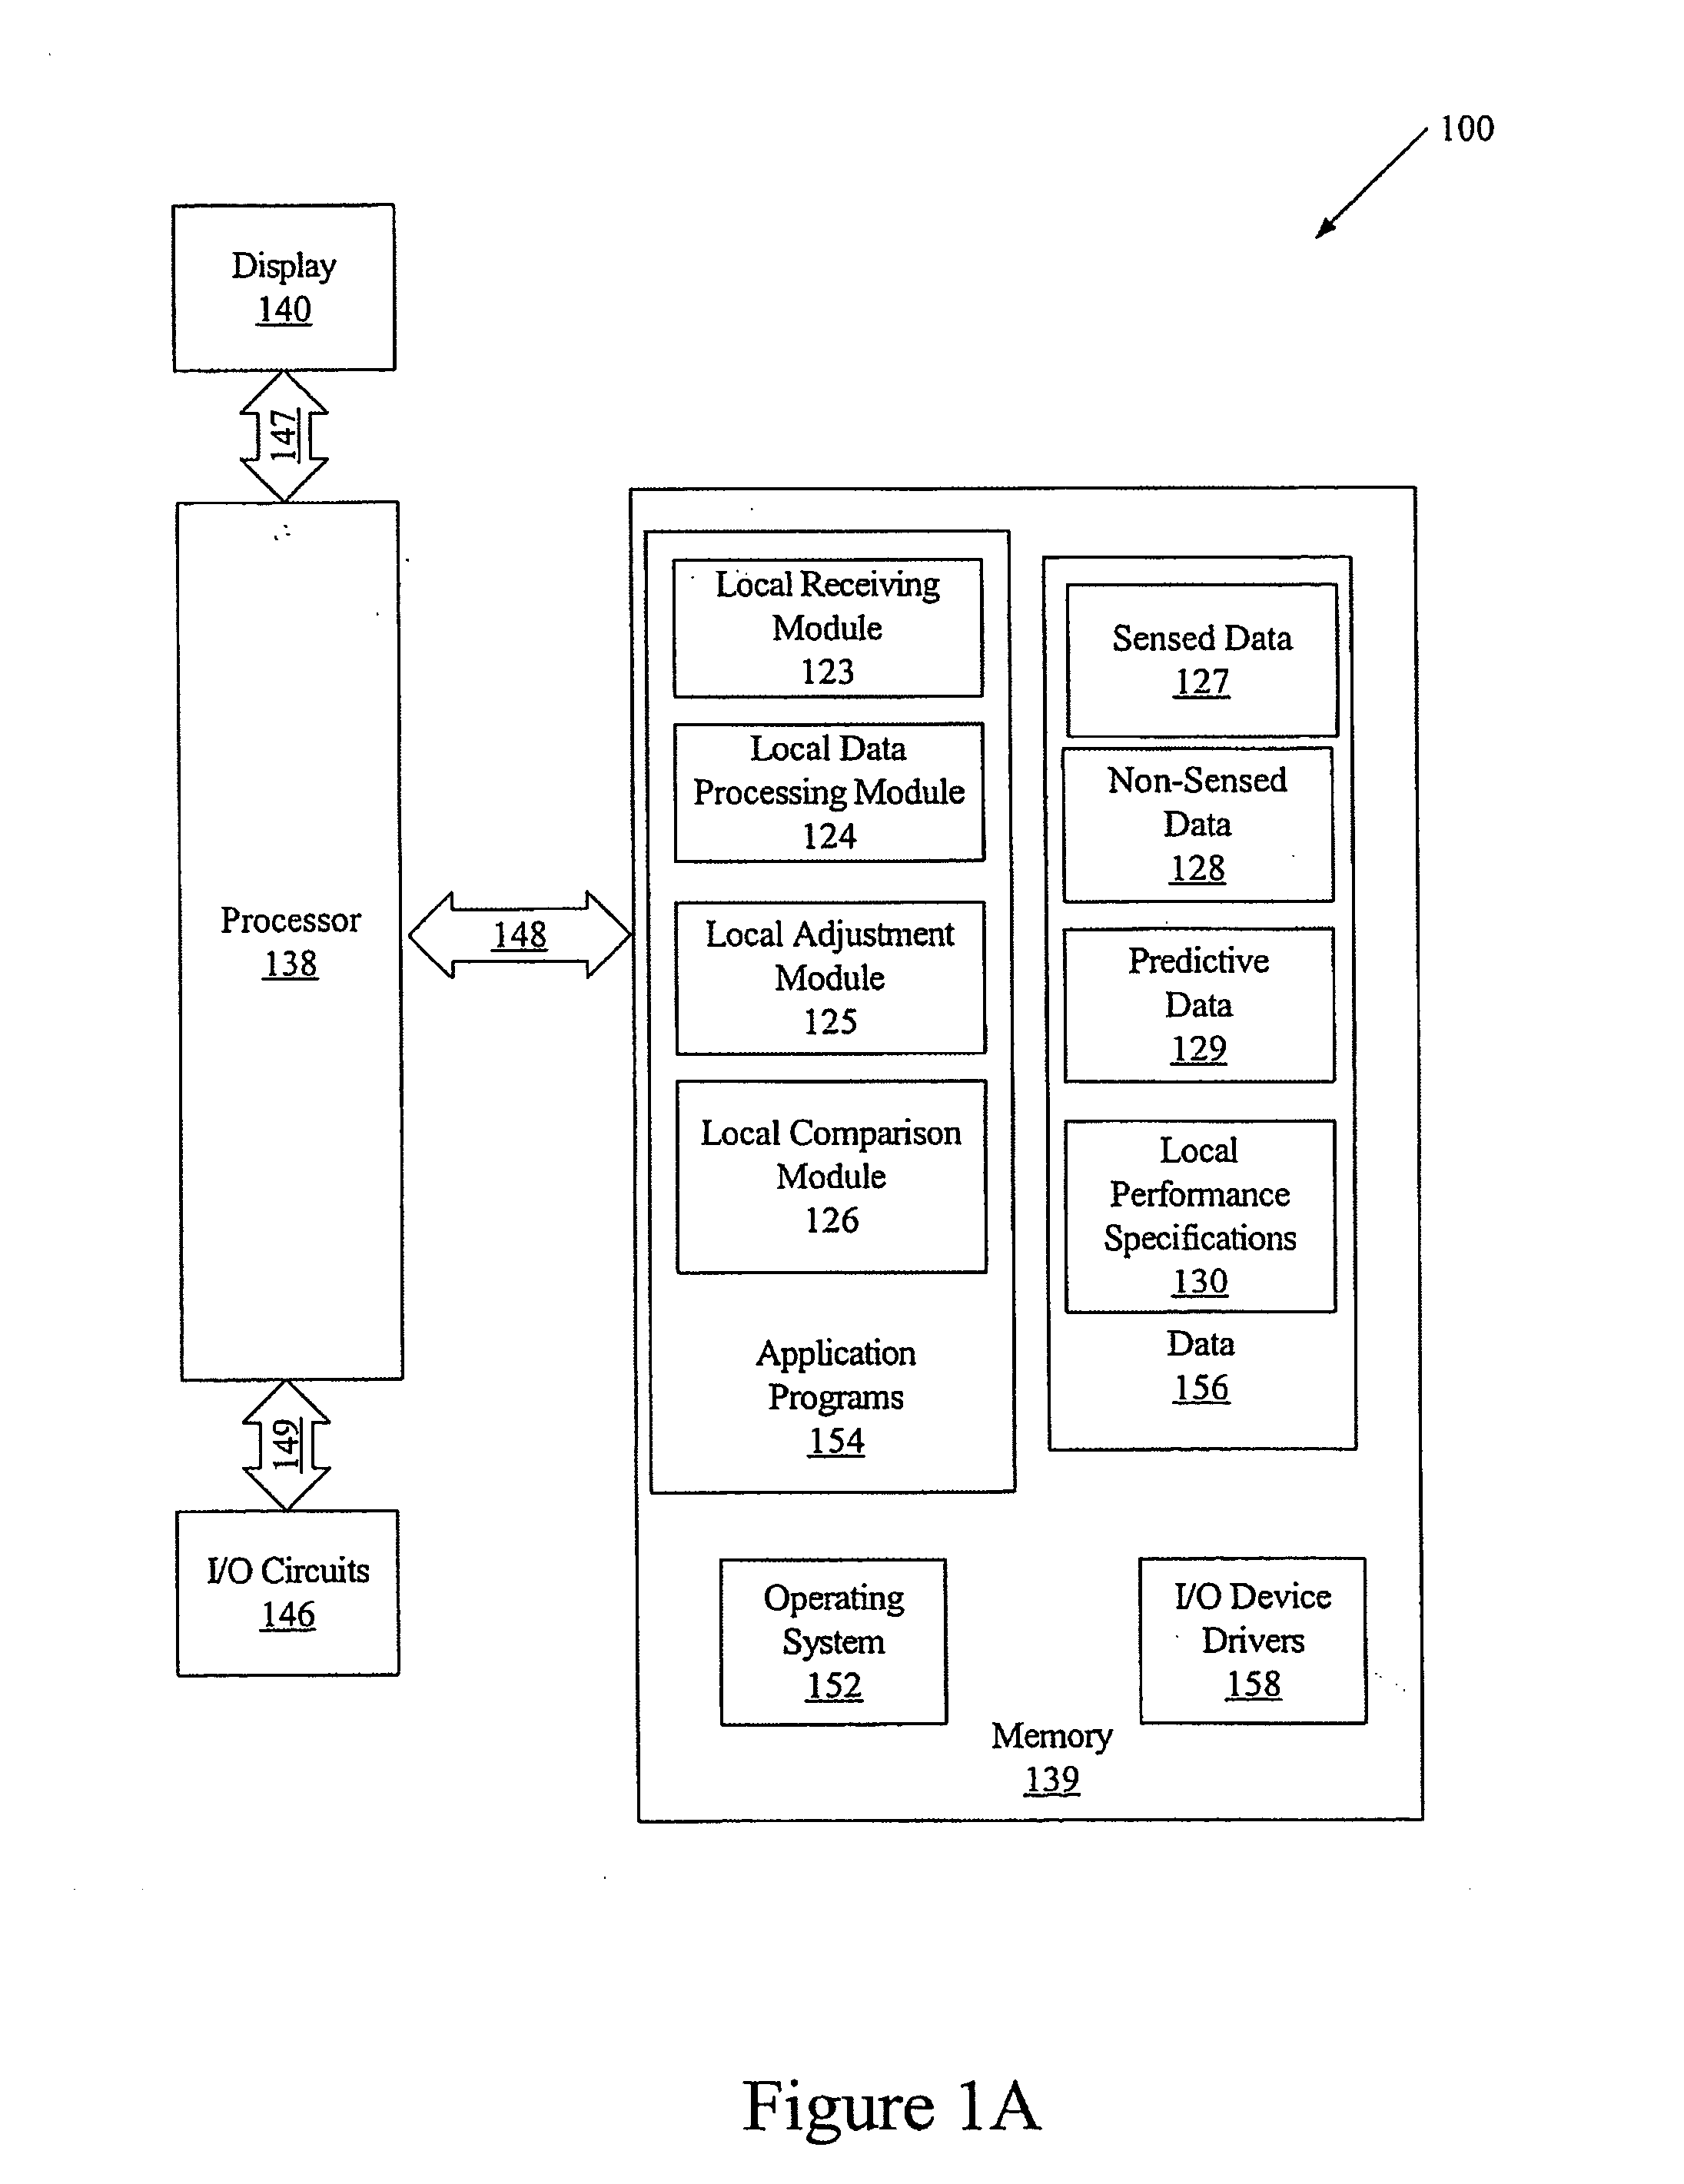 Methods, systems and computer program products for controlling a climate in a building